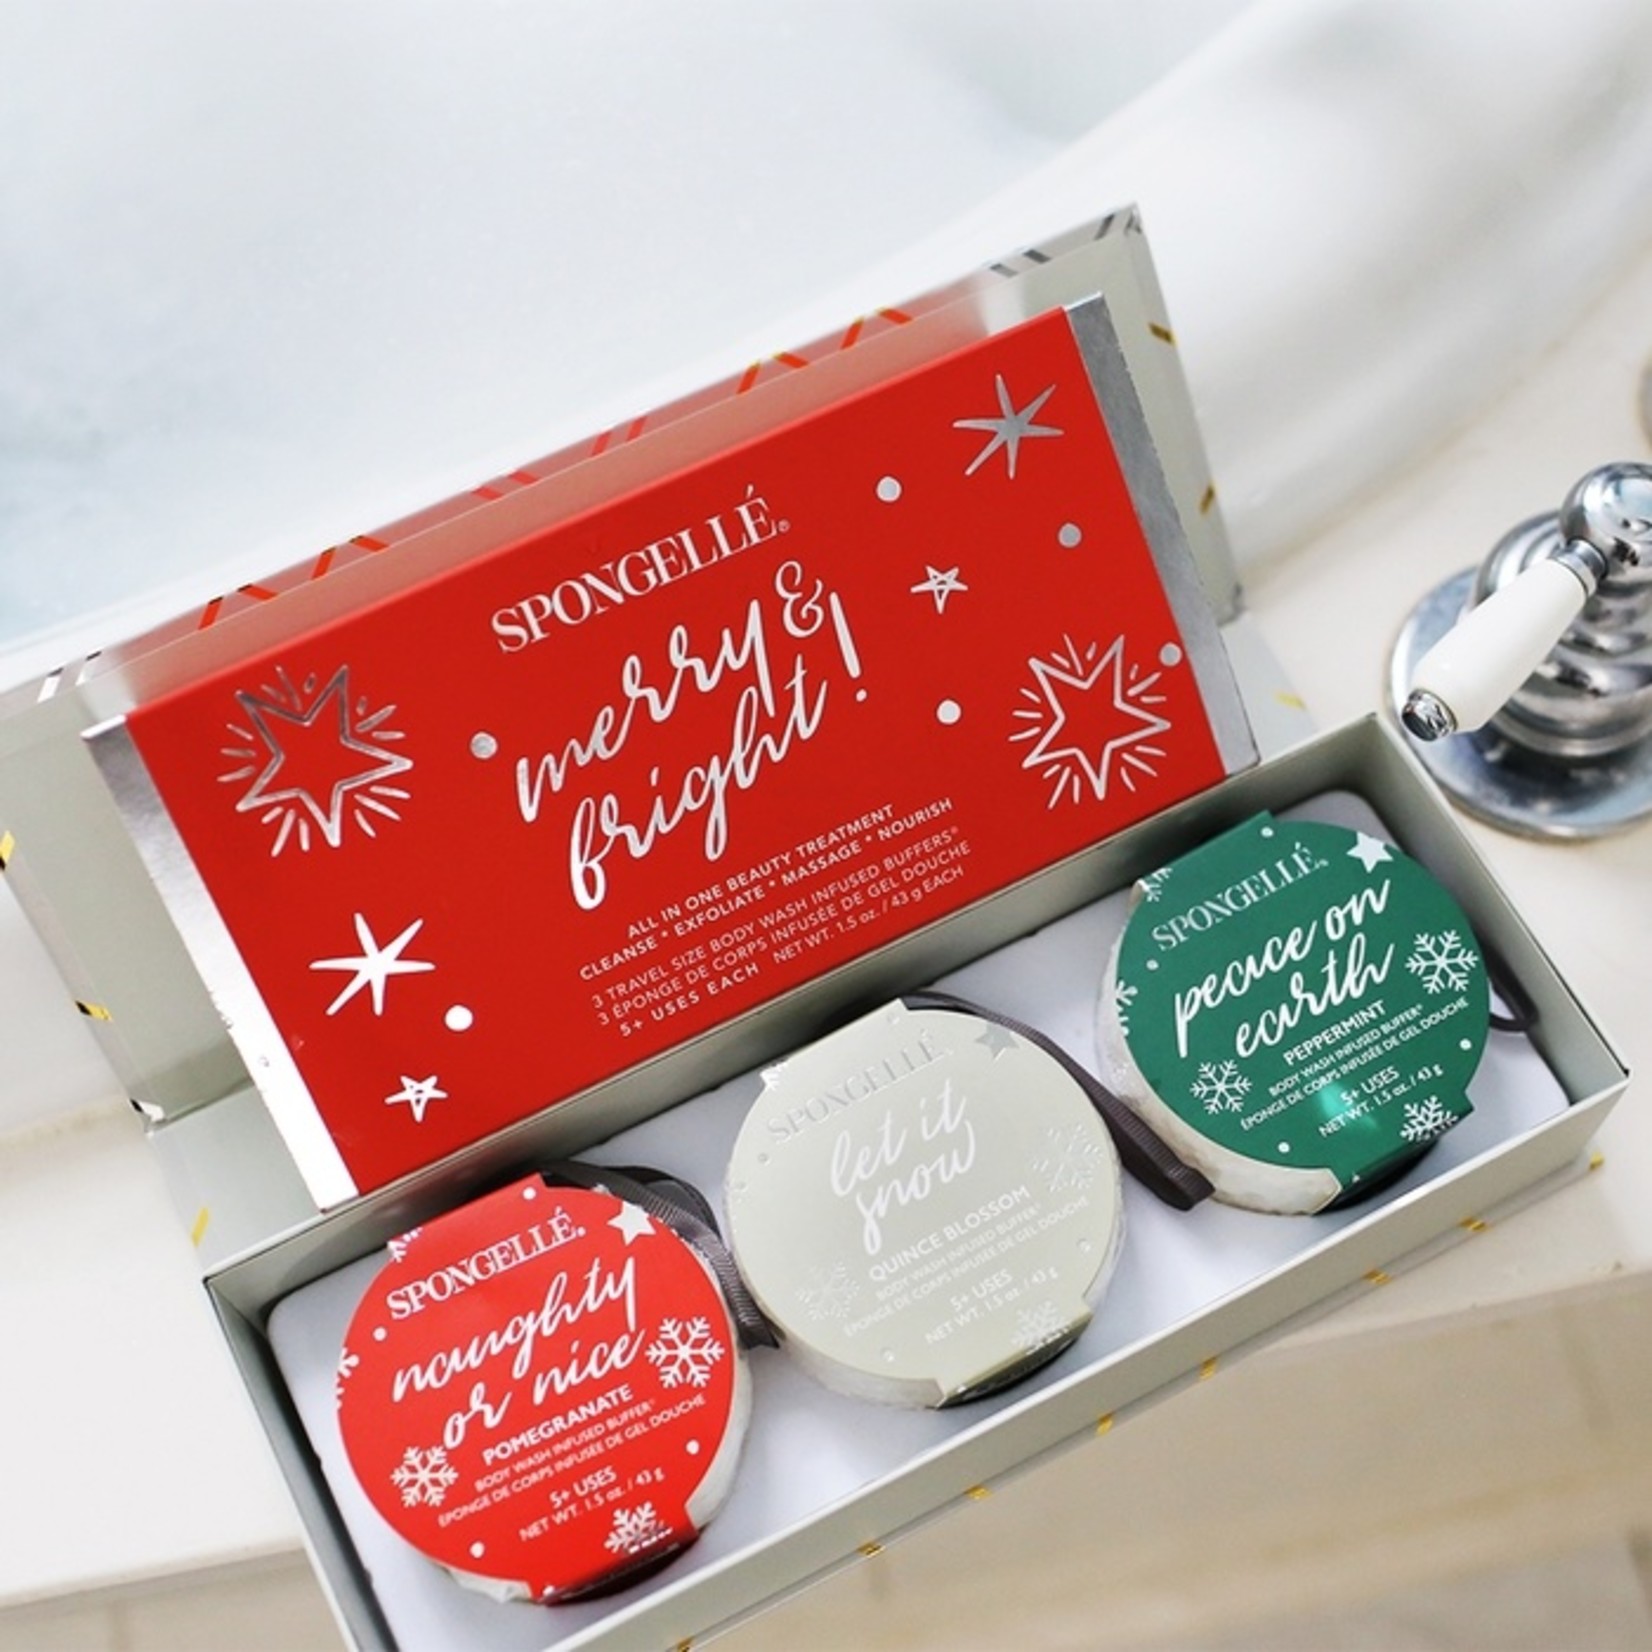 The Merry & Bright Gift Set